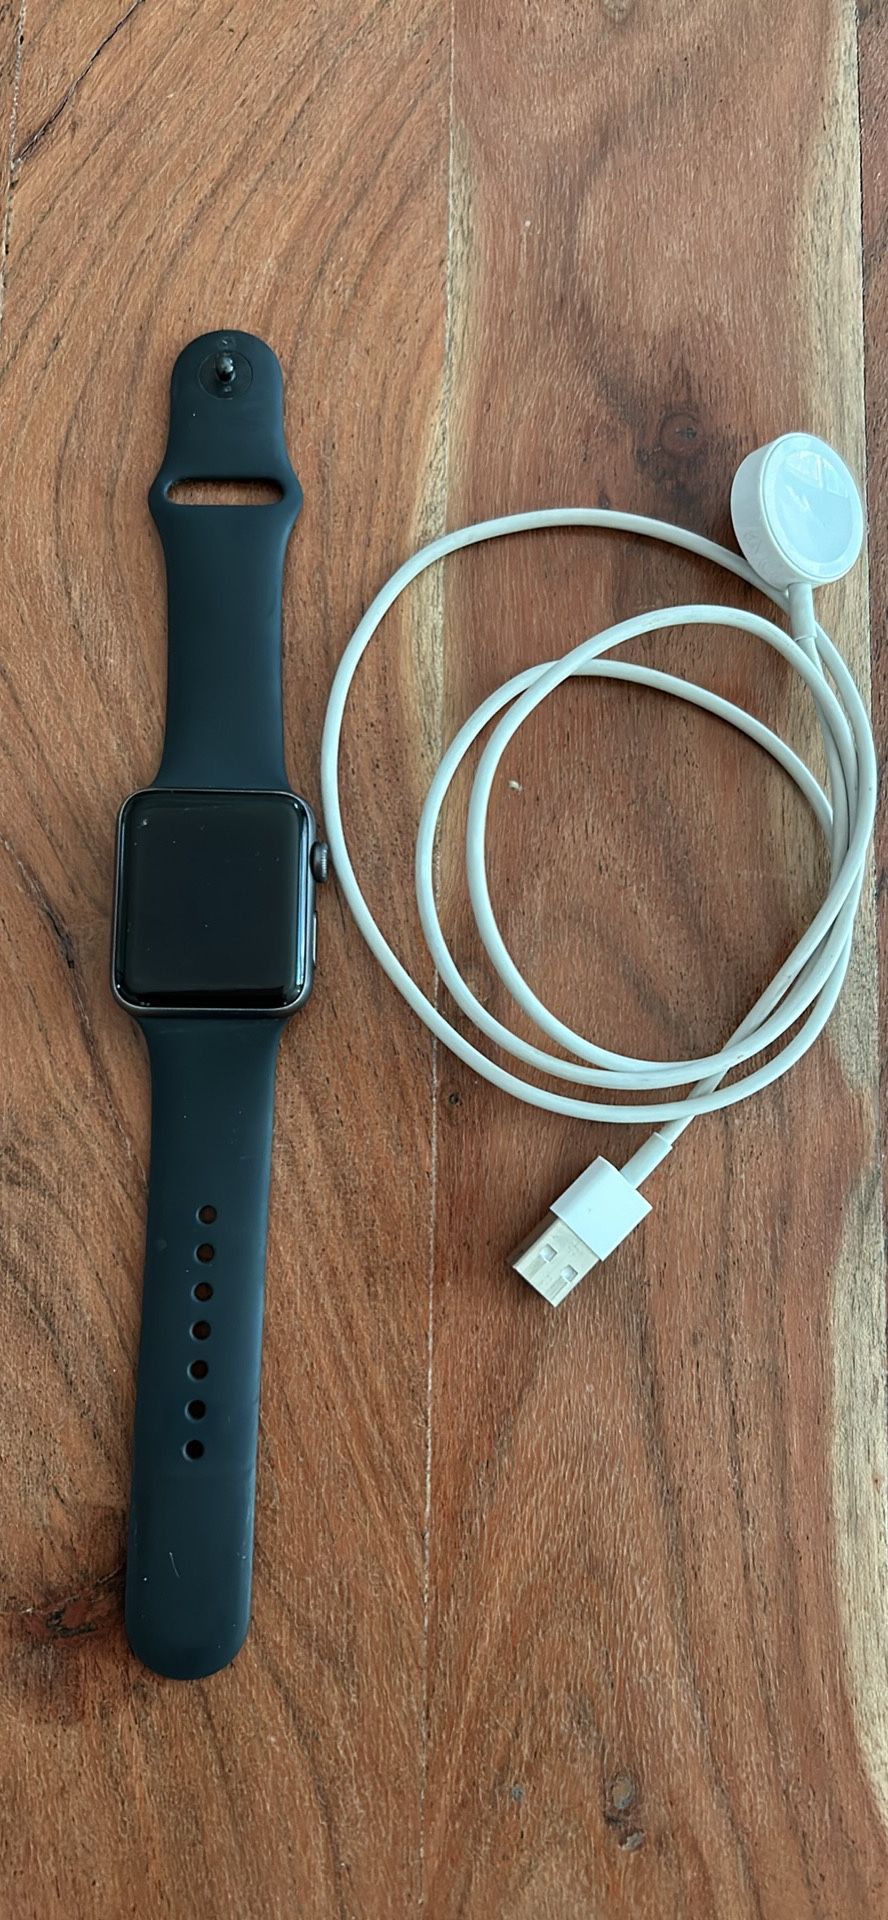 Apple Watch + Charger